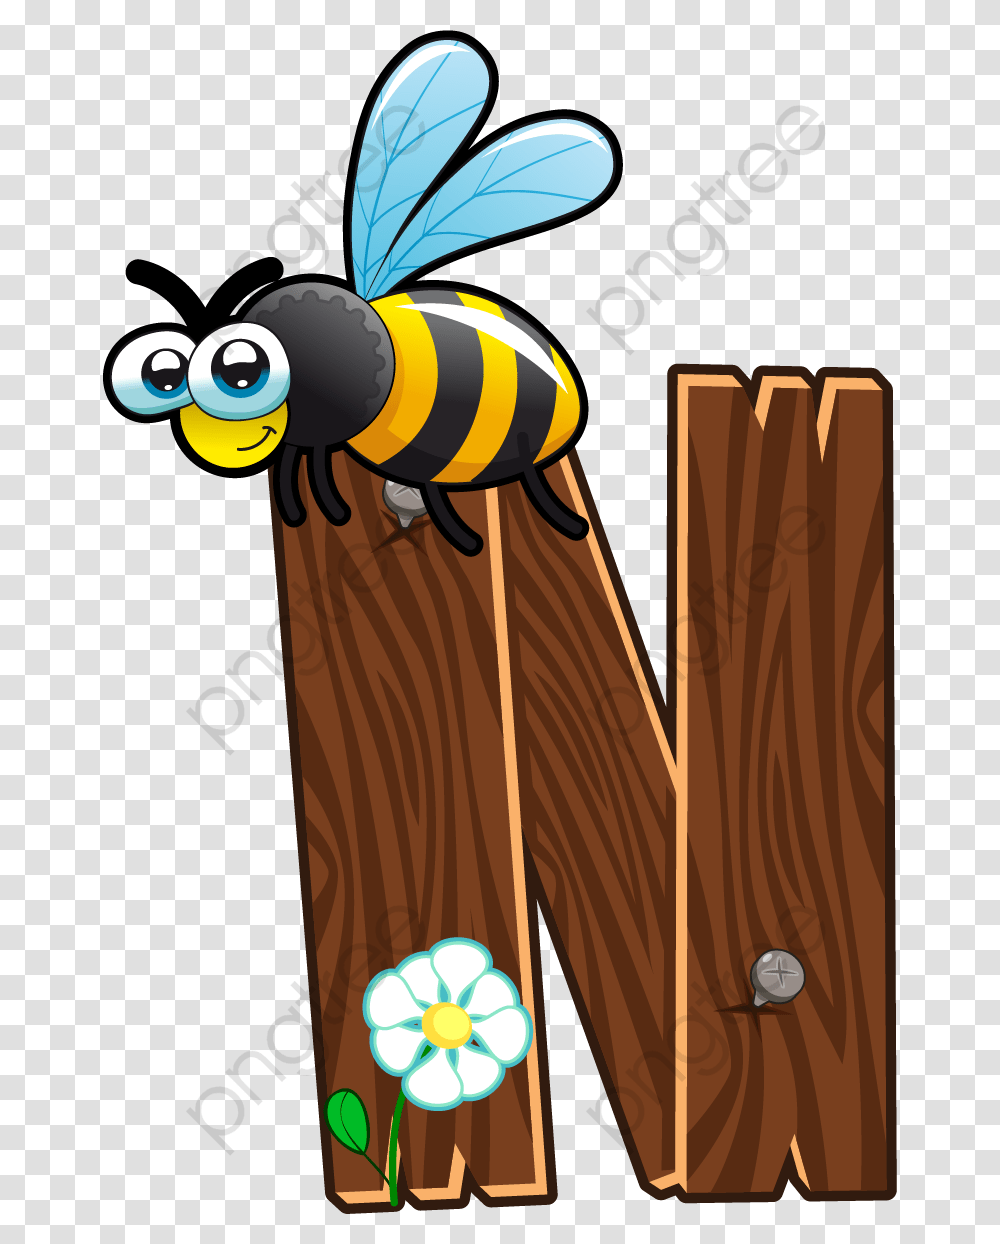 Bumblebee Clipart Graduation Cartoon Letter N, Insect, Invertebrate, Animal, Honey Bee Transparent Png